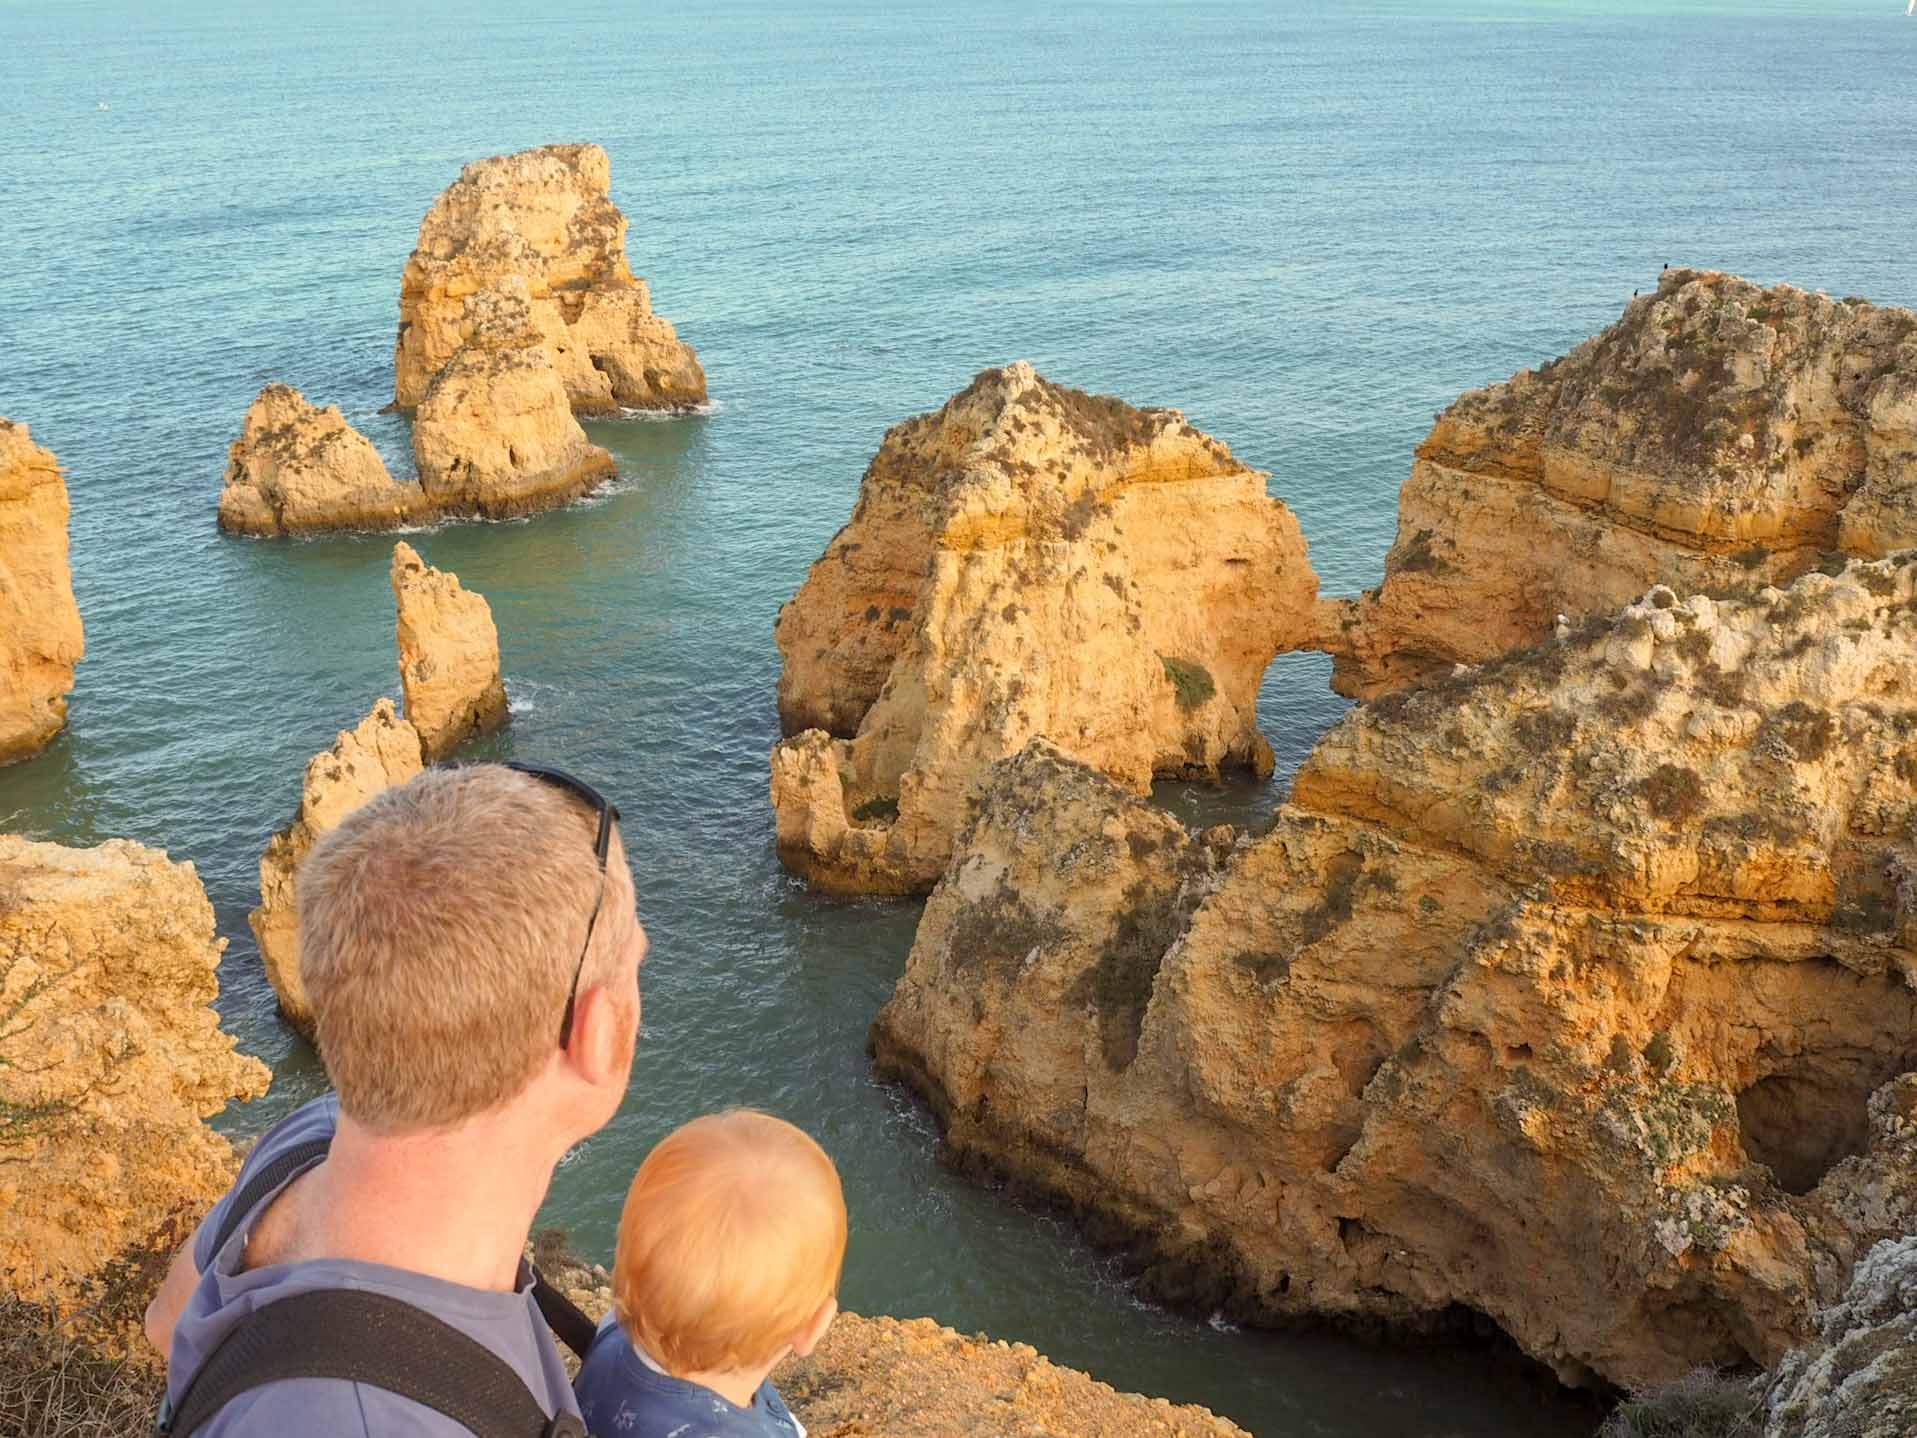 Father holding a small child while peering over a cliff edge down to the sea below, with eroded rock formations